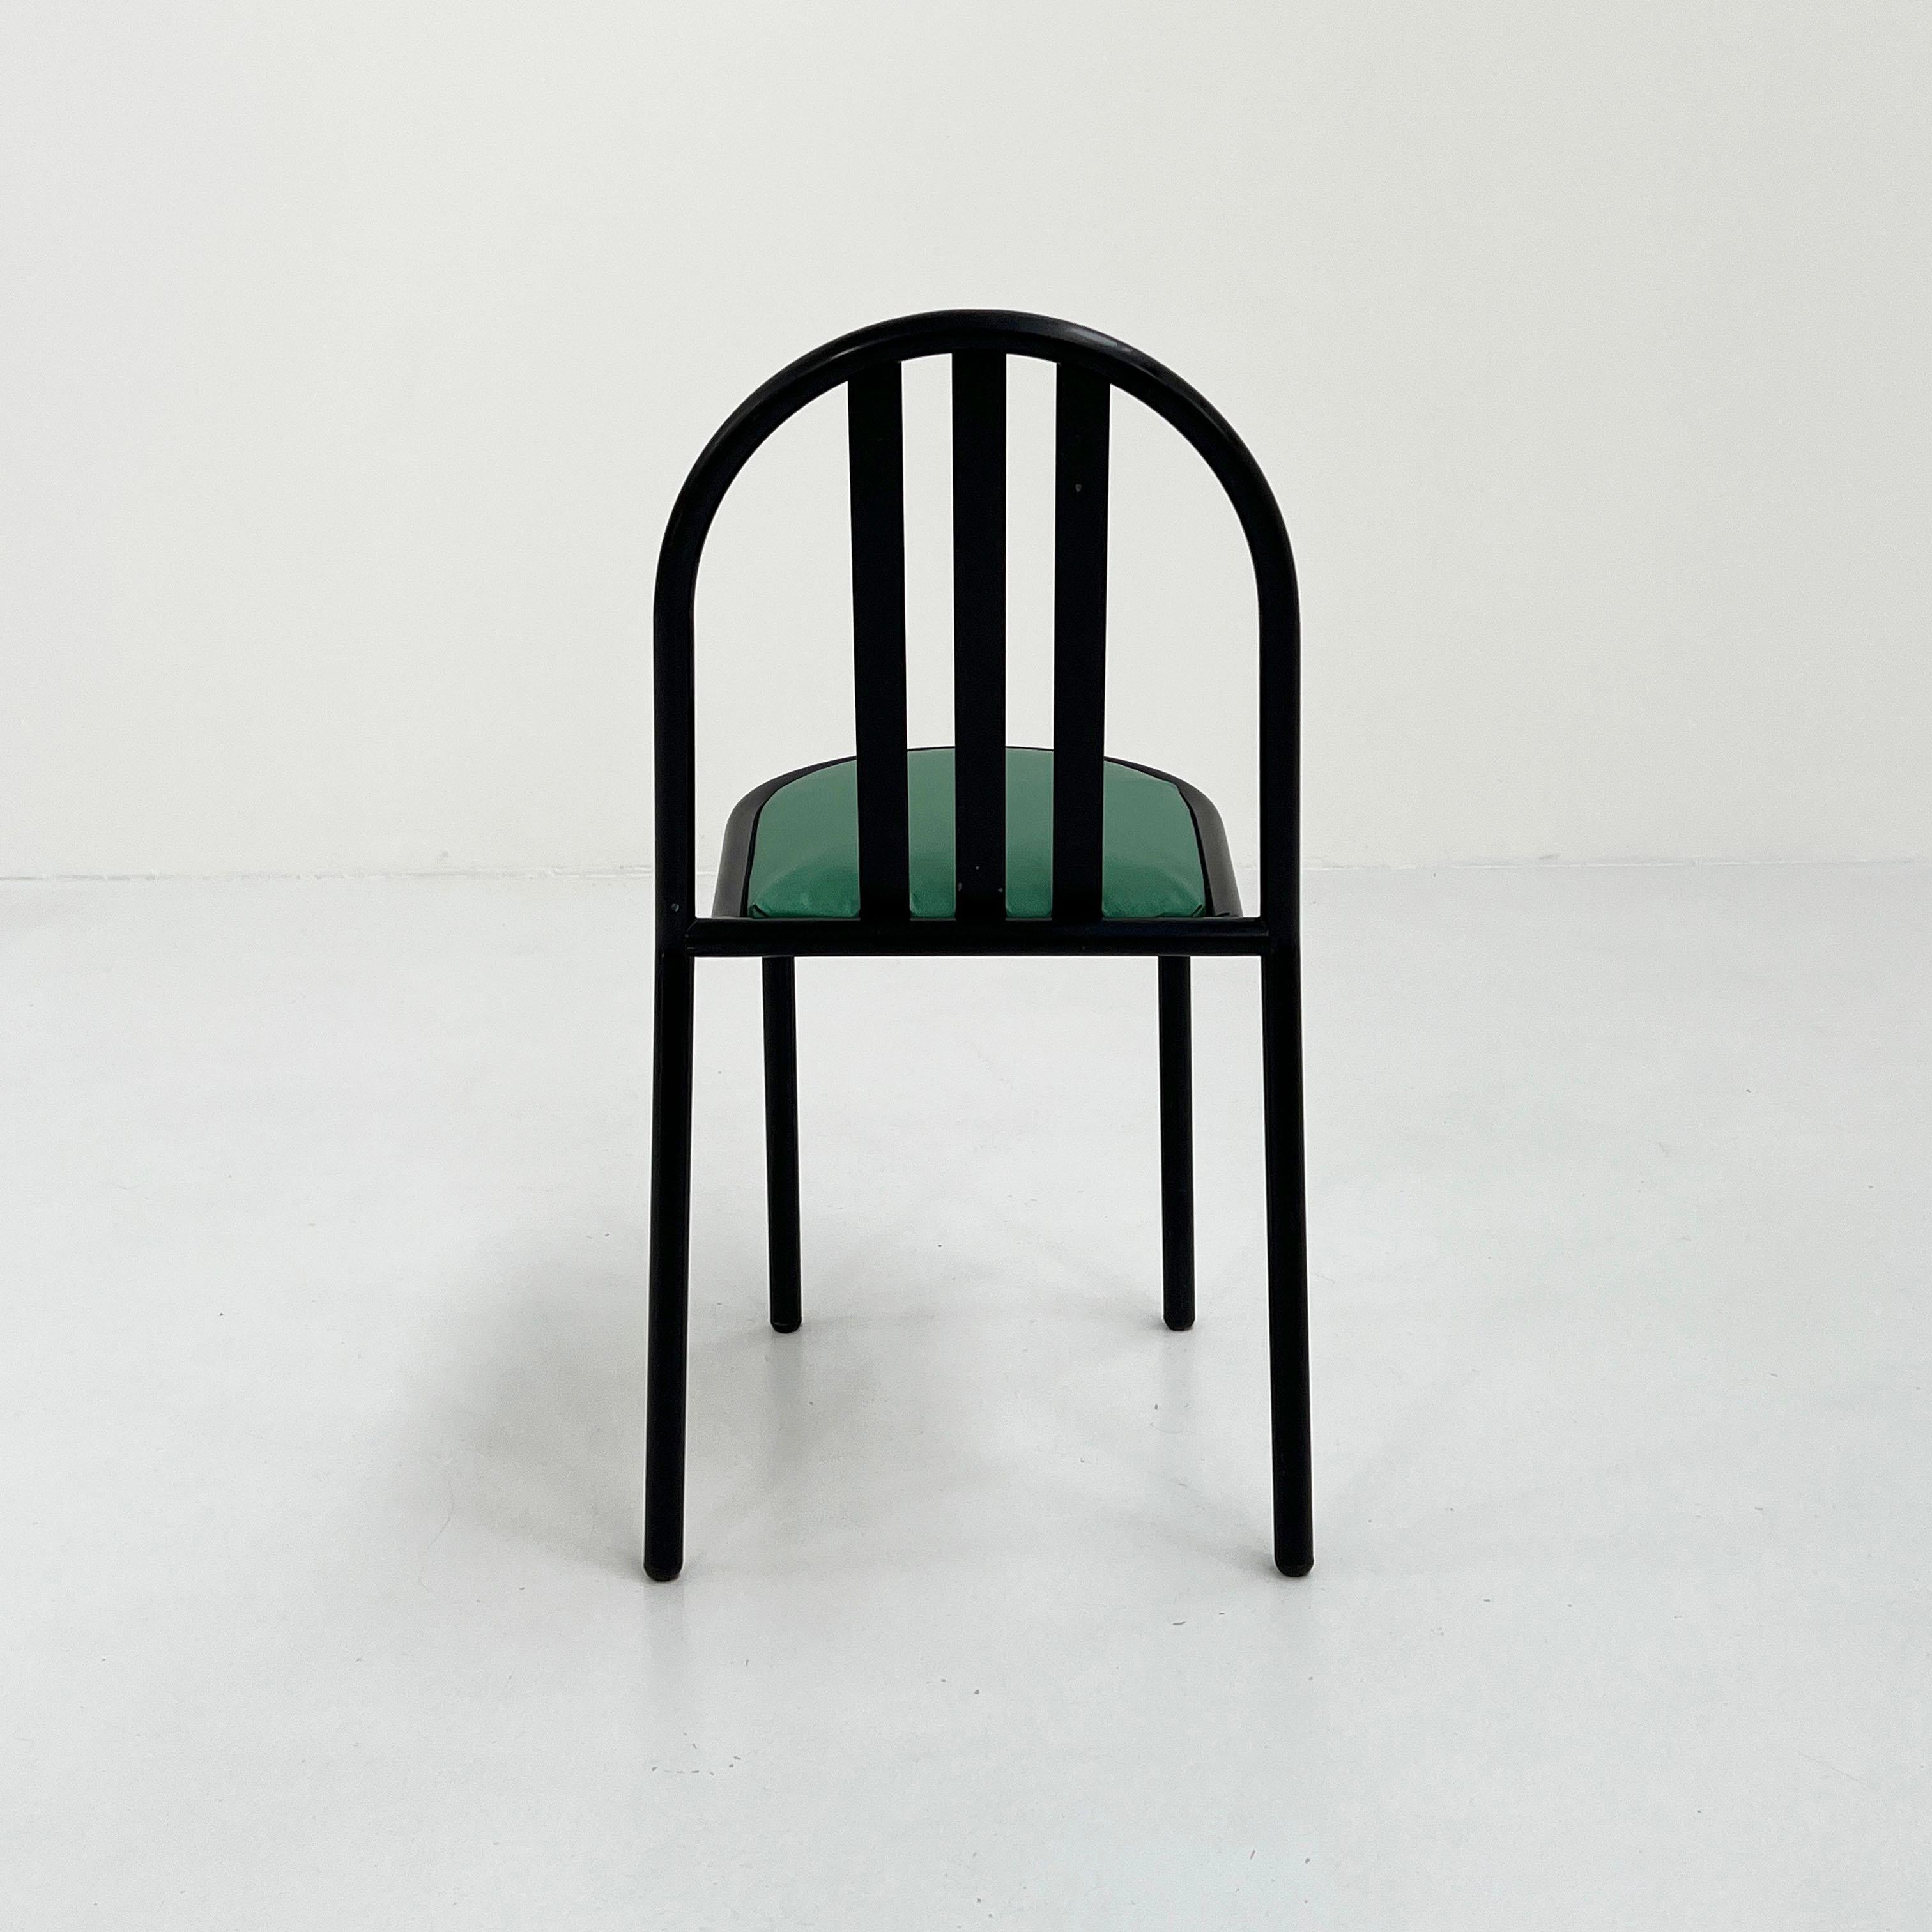 Late 20th Century No.222 Chair with Green Seat by Robert Mallet-Stevens for Pallucco Italia, 1980s